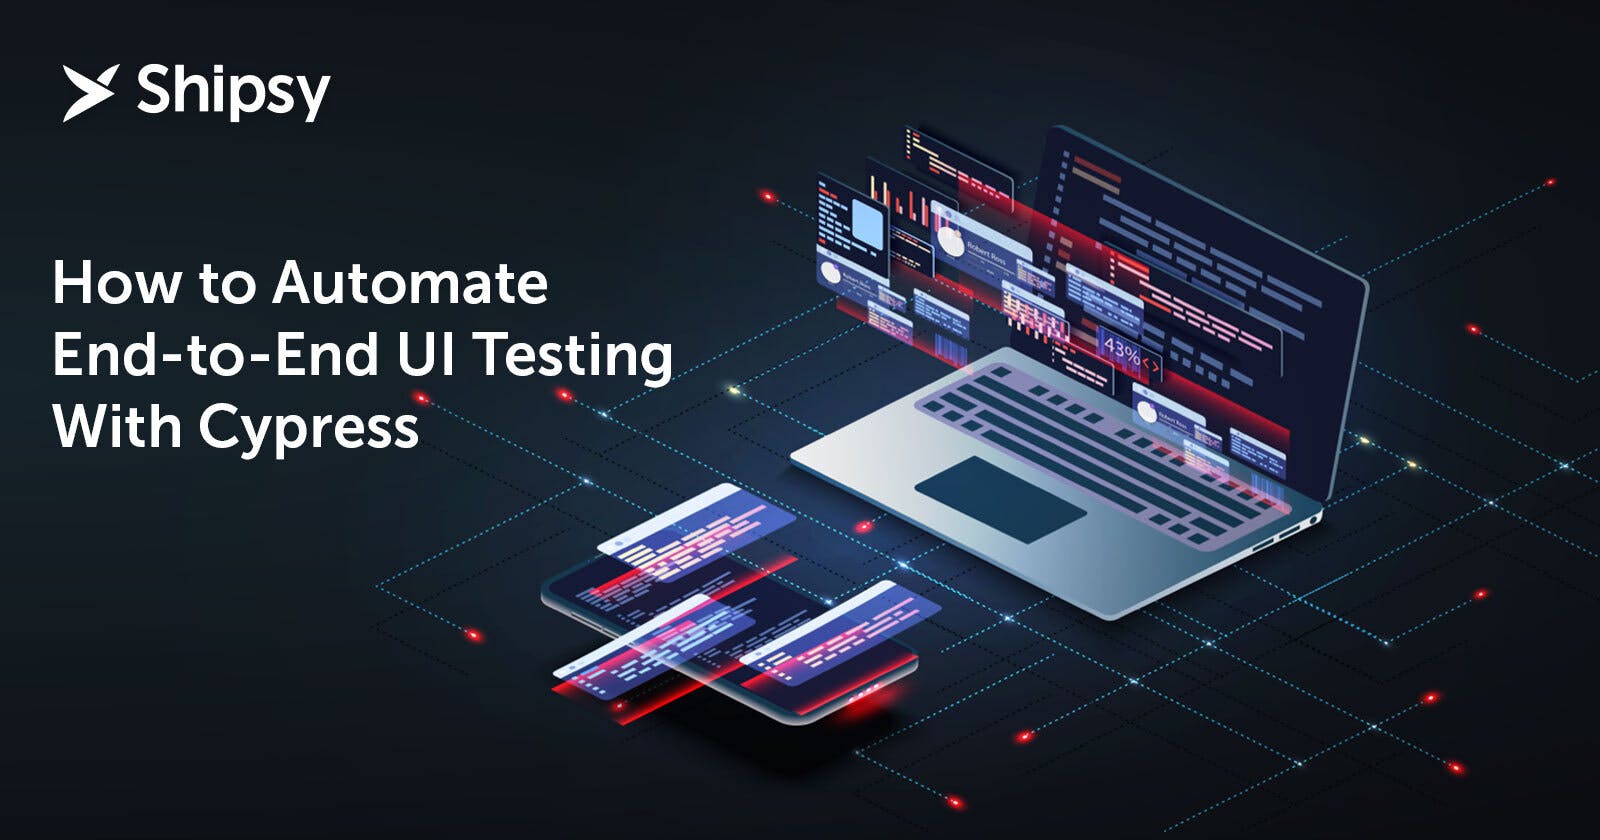 How to Automate End-to-End UI Testing With Cypress: A Detailed Step-by-Step Guide